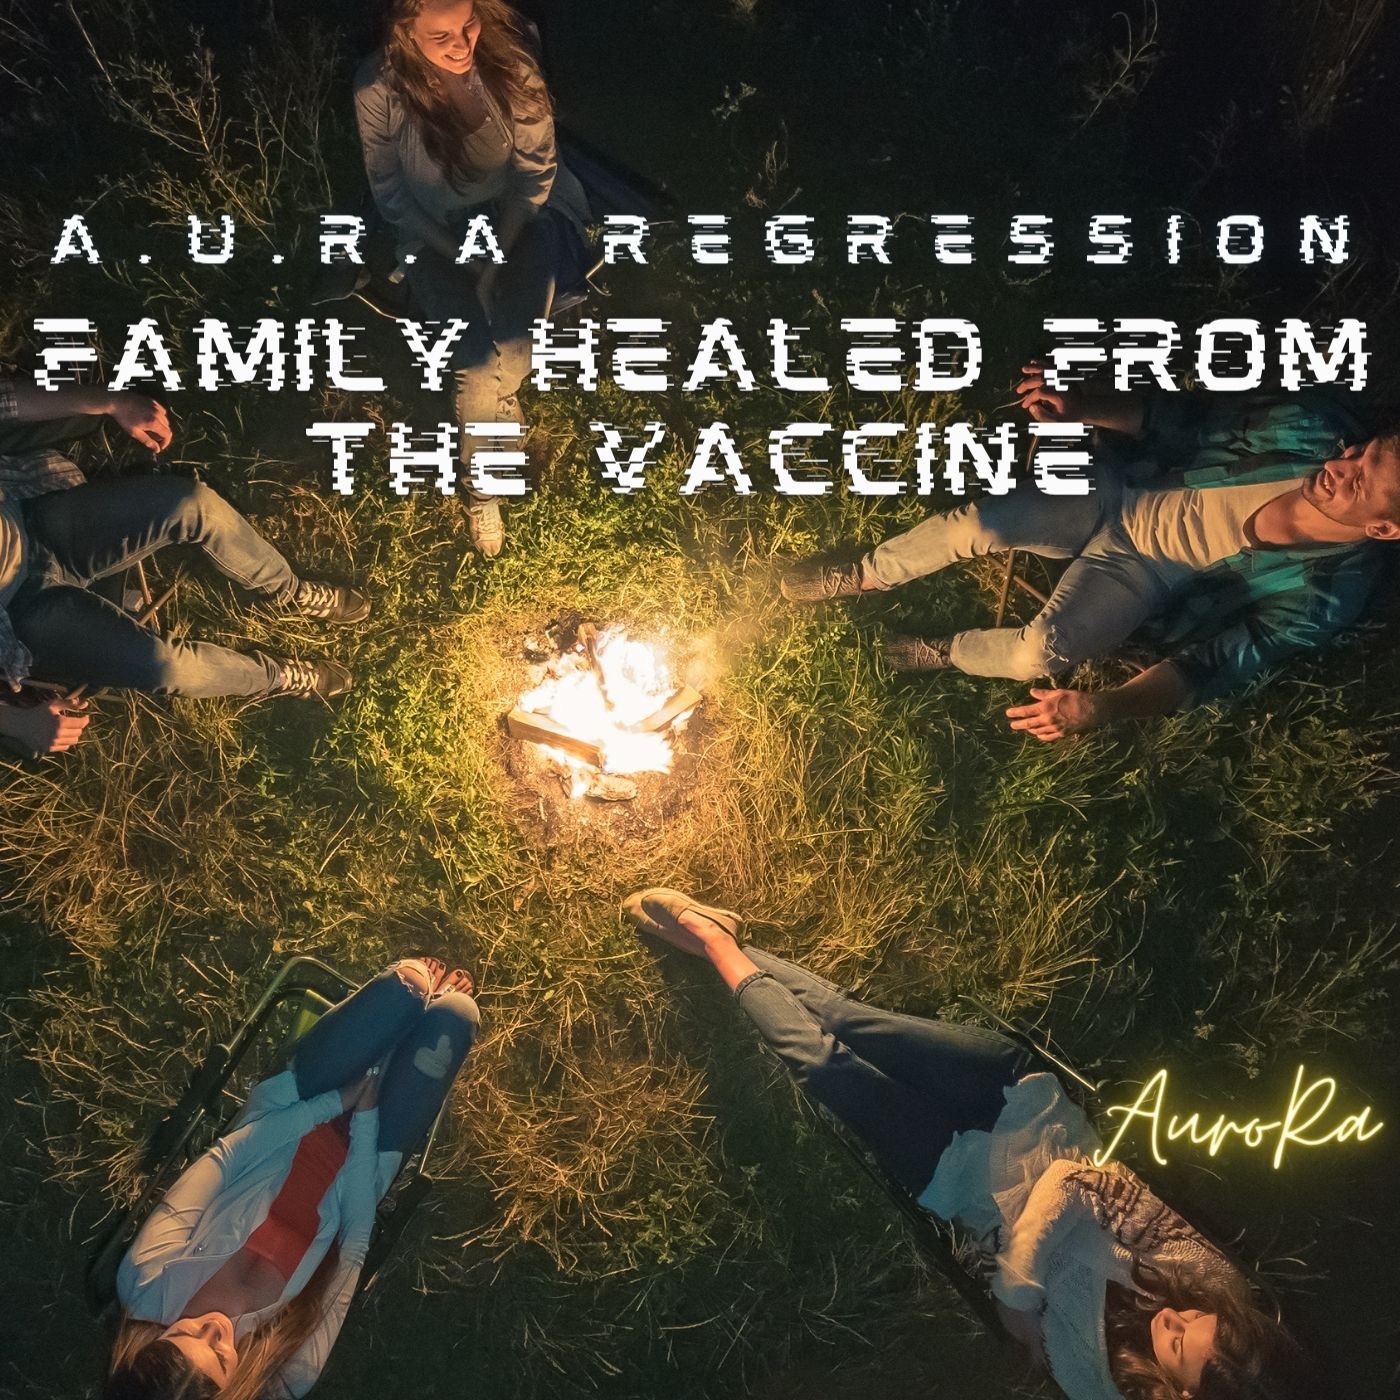 Family Healed From the Vaccine | A.U.R.A. Regression